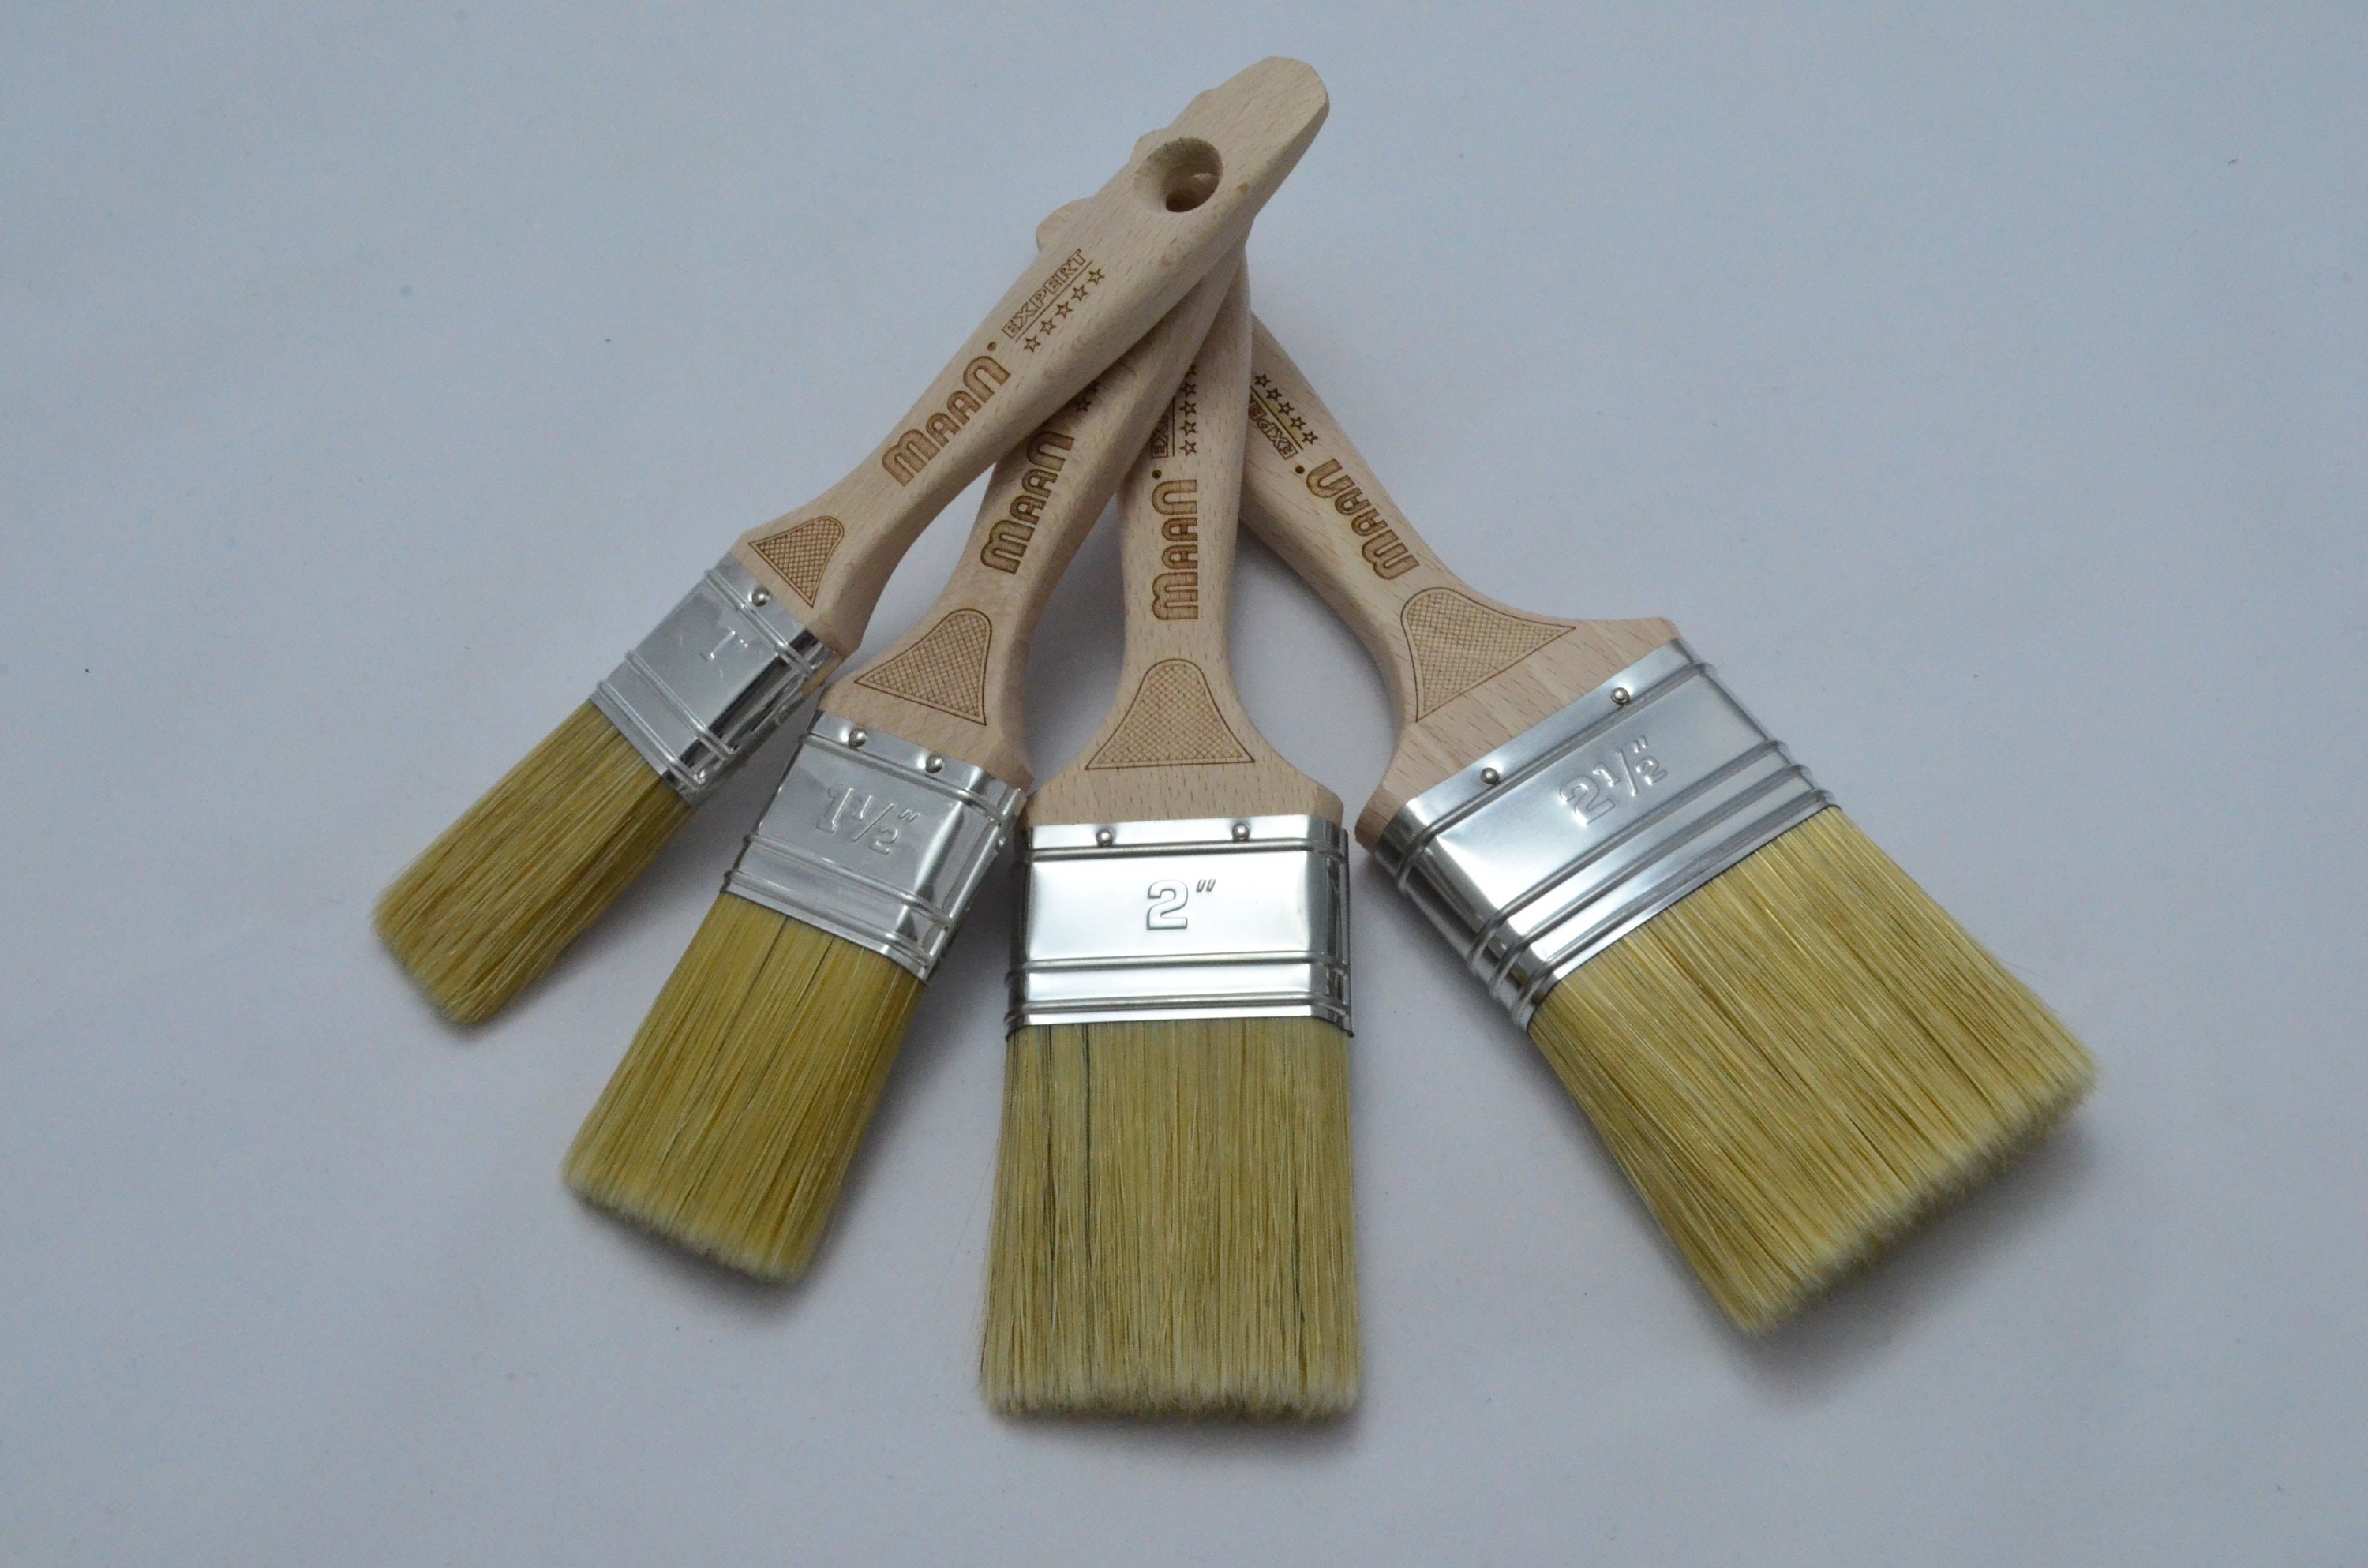 Small Smooth & Blend Brush by Posh Chalk for superb paint finishes